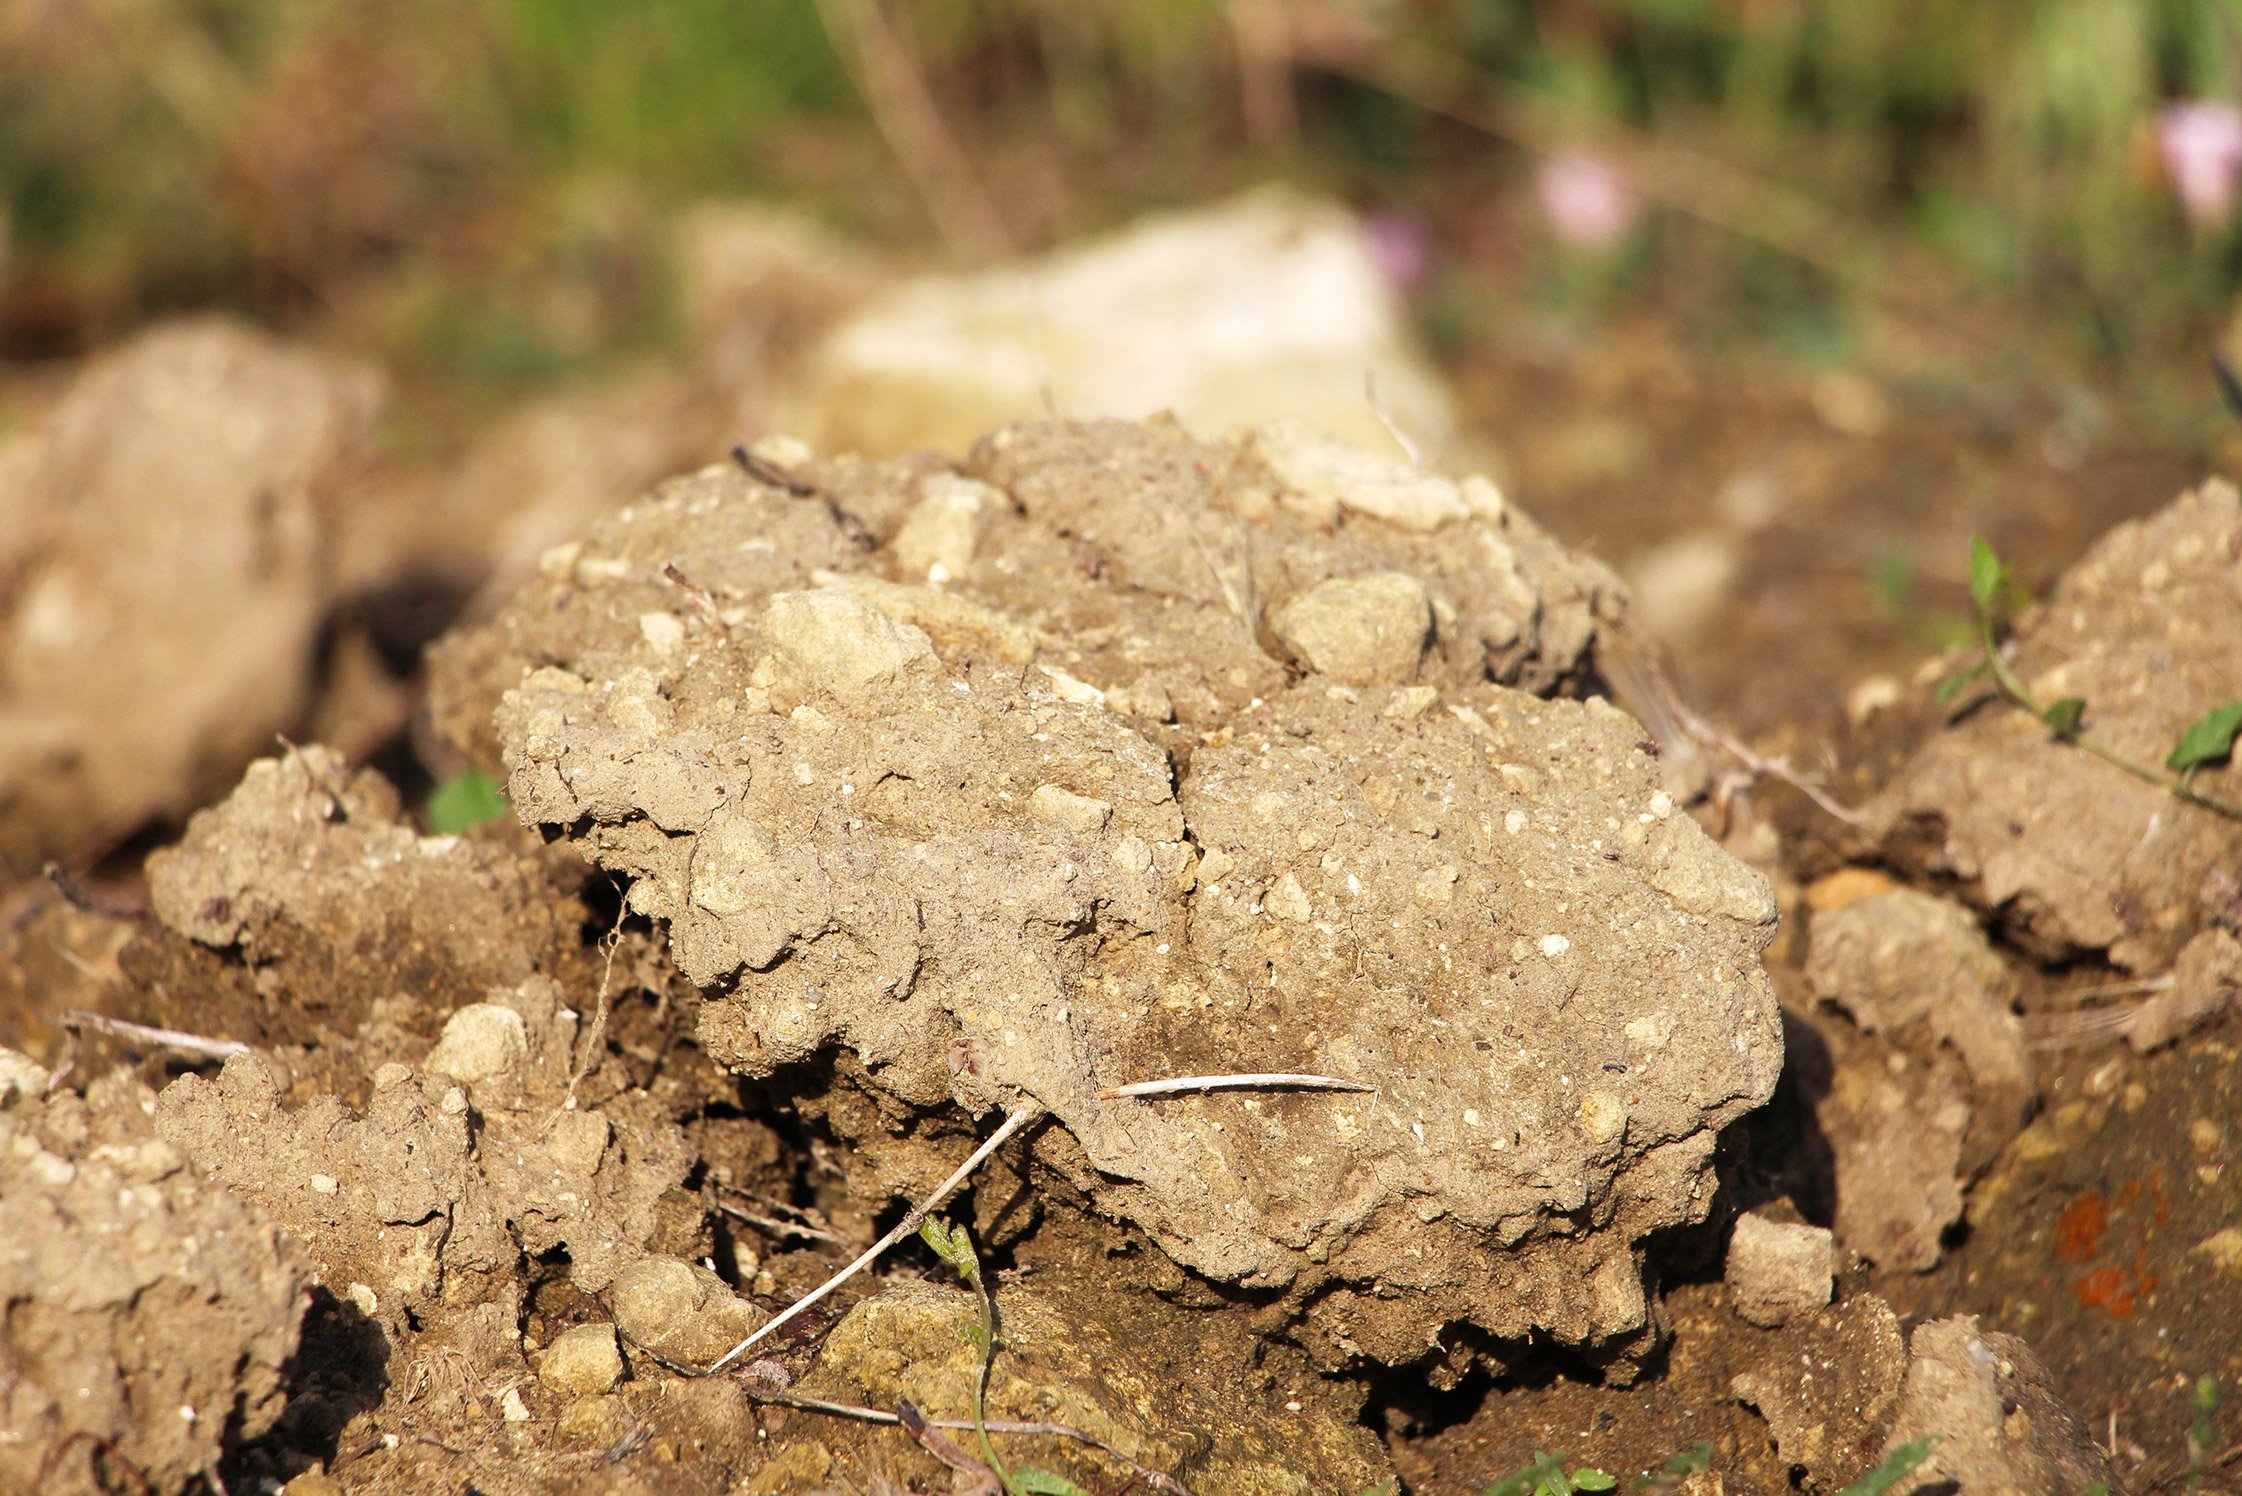 Top soil from Arnaud Lambert's vineyard composed of Clay and sand in Brézé, Saumur